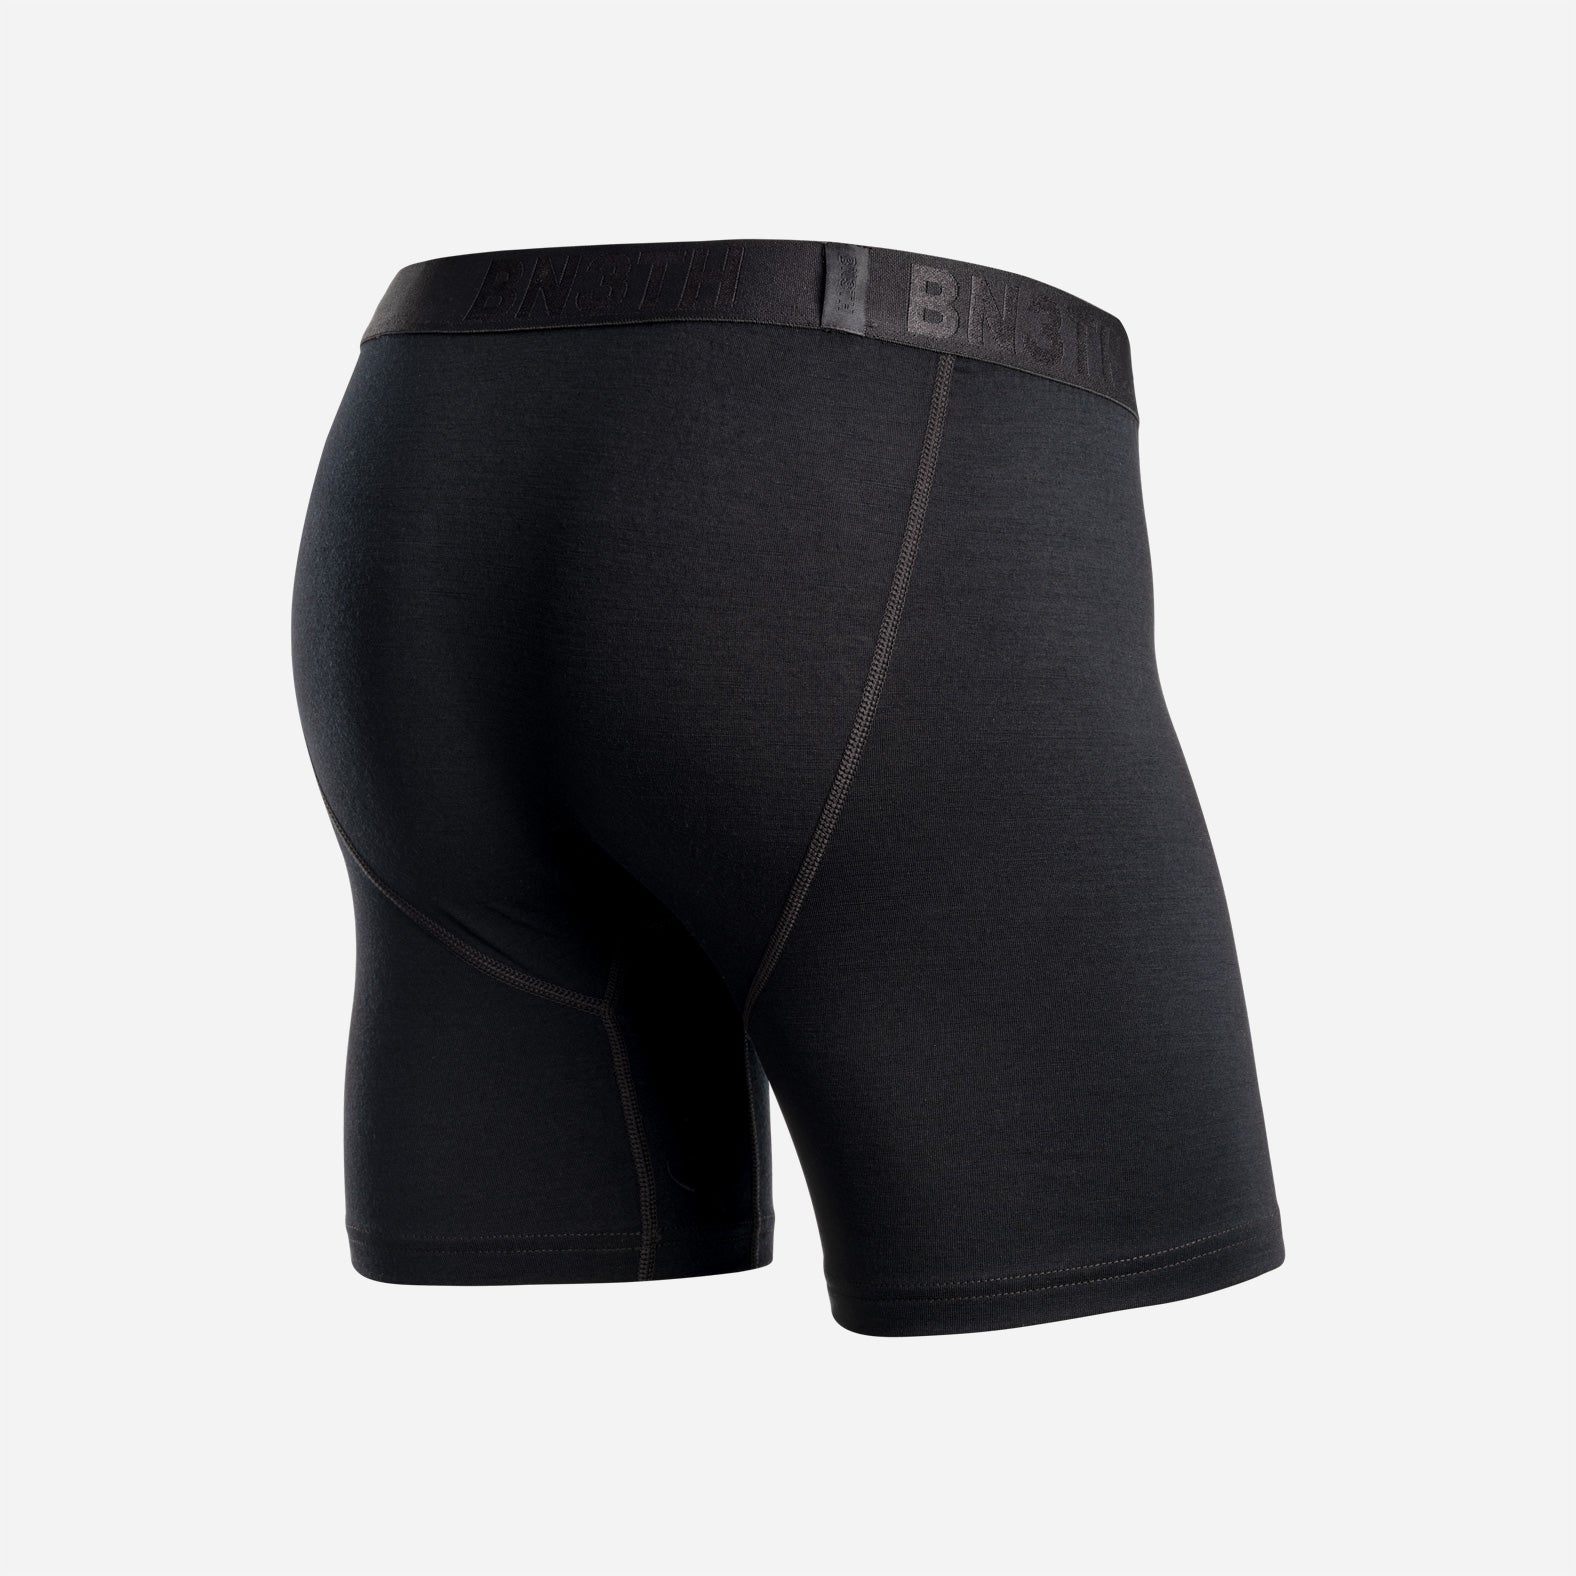 Product Review: Sheath Underwear